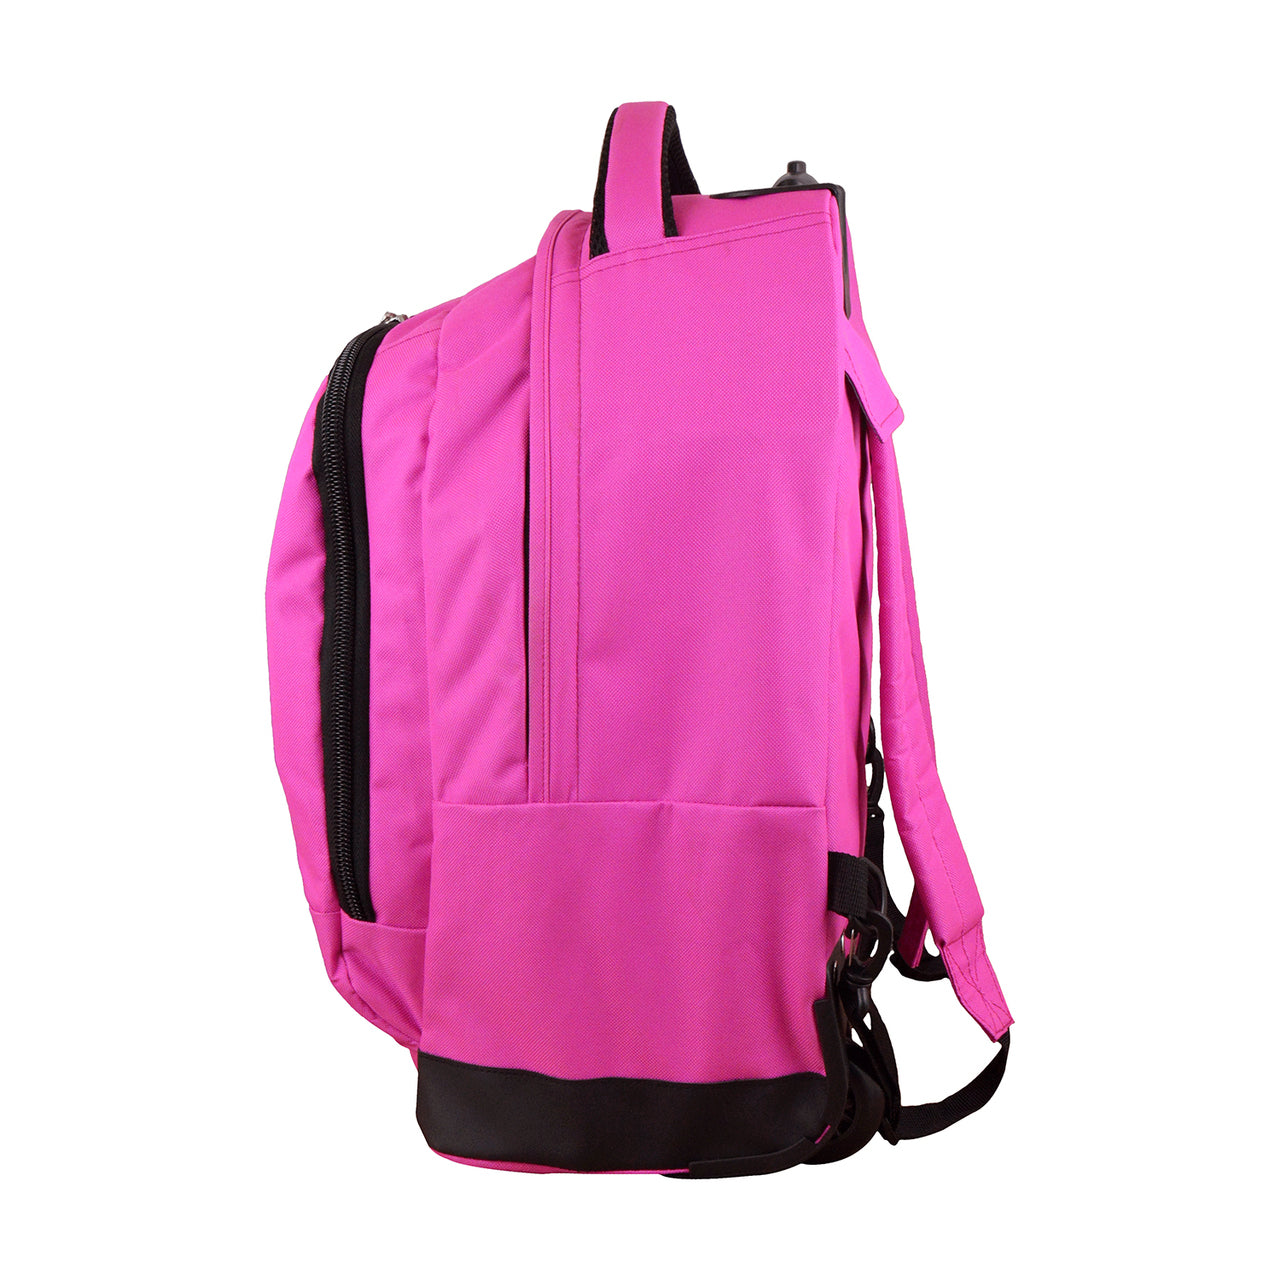 New Orleans Saints Premium Wheeled Backpack in Pink